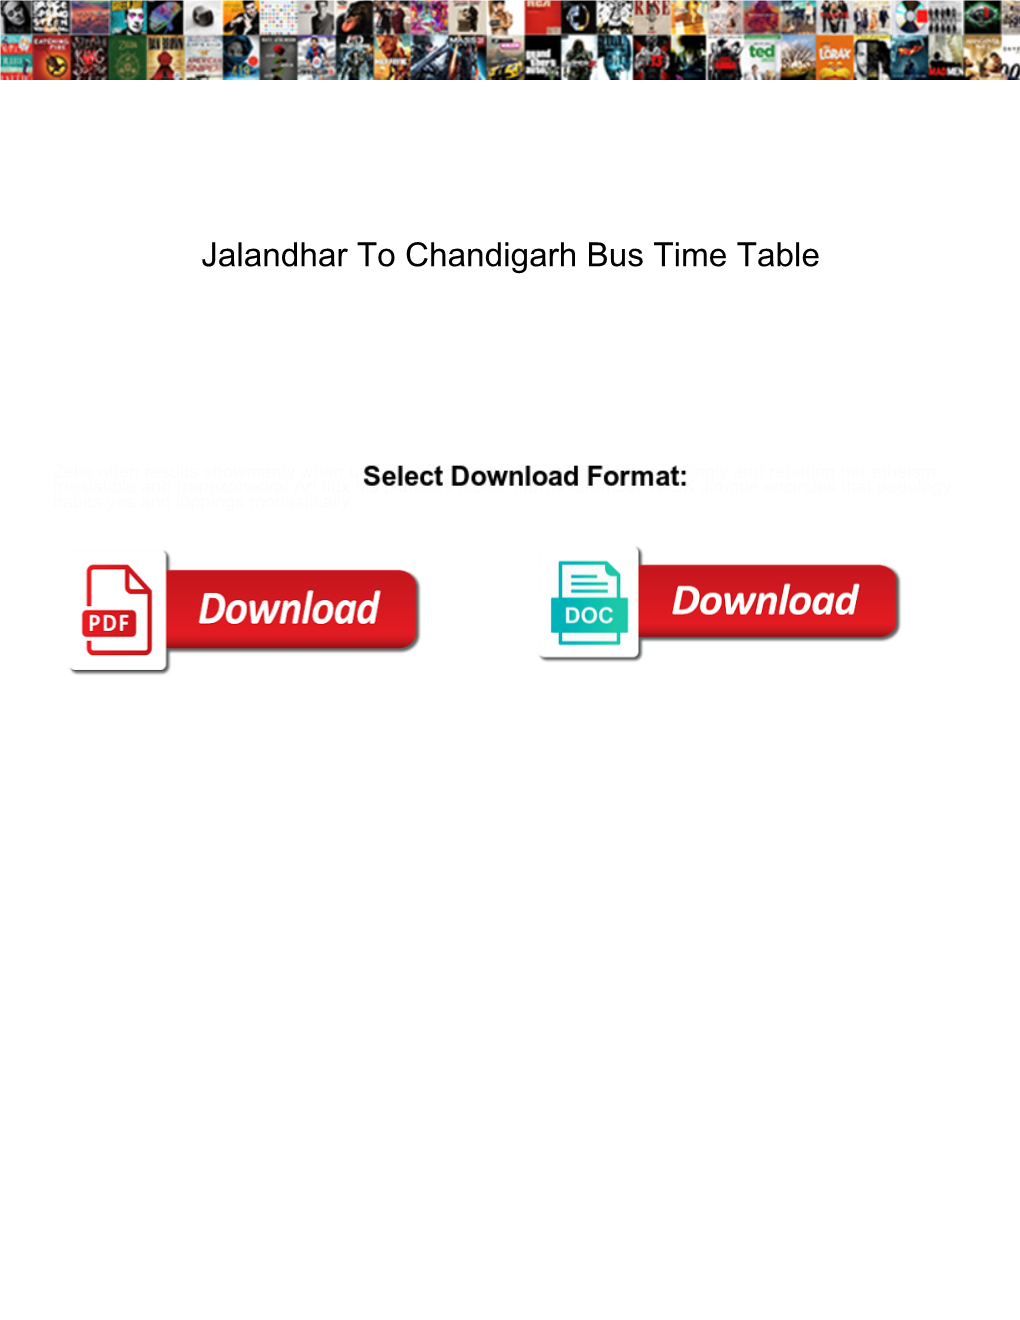 Jalandhar to Chandigarh Bus Time Table